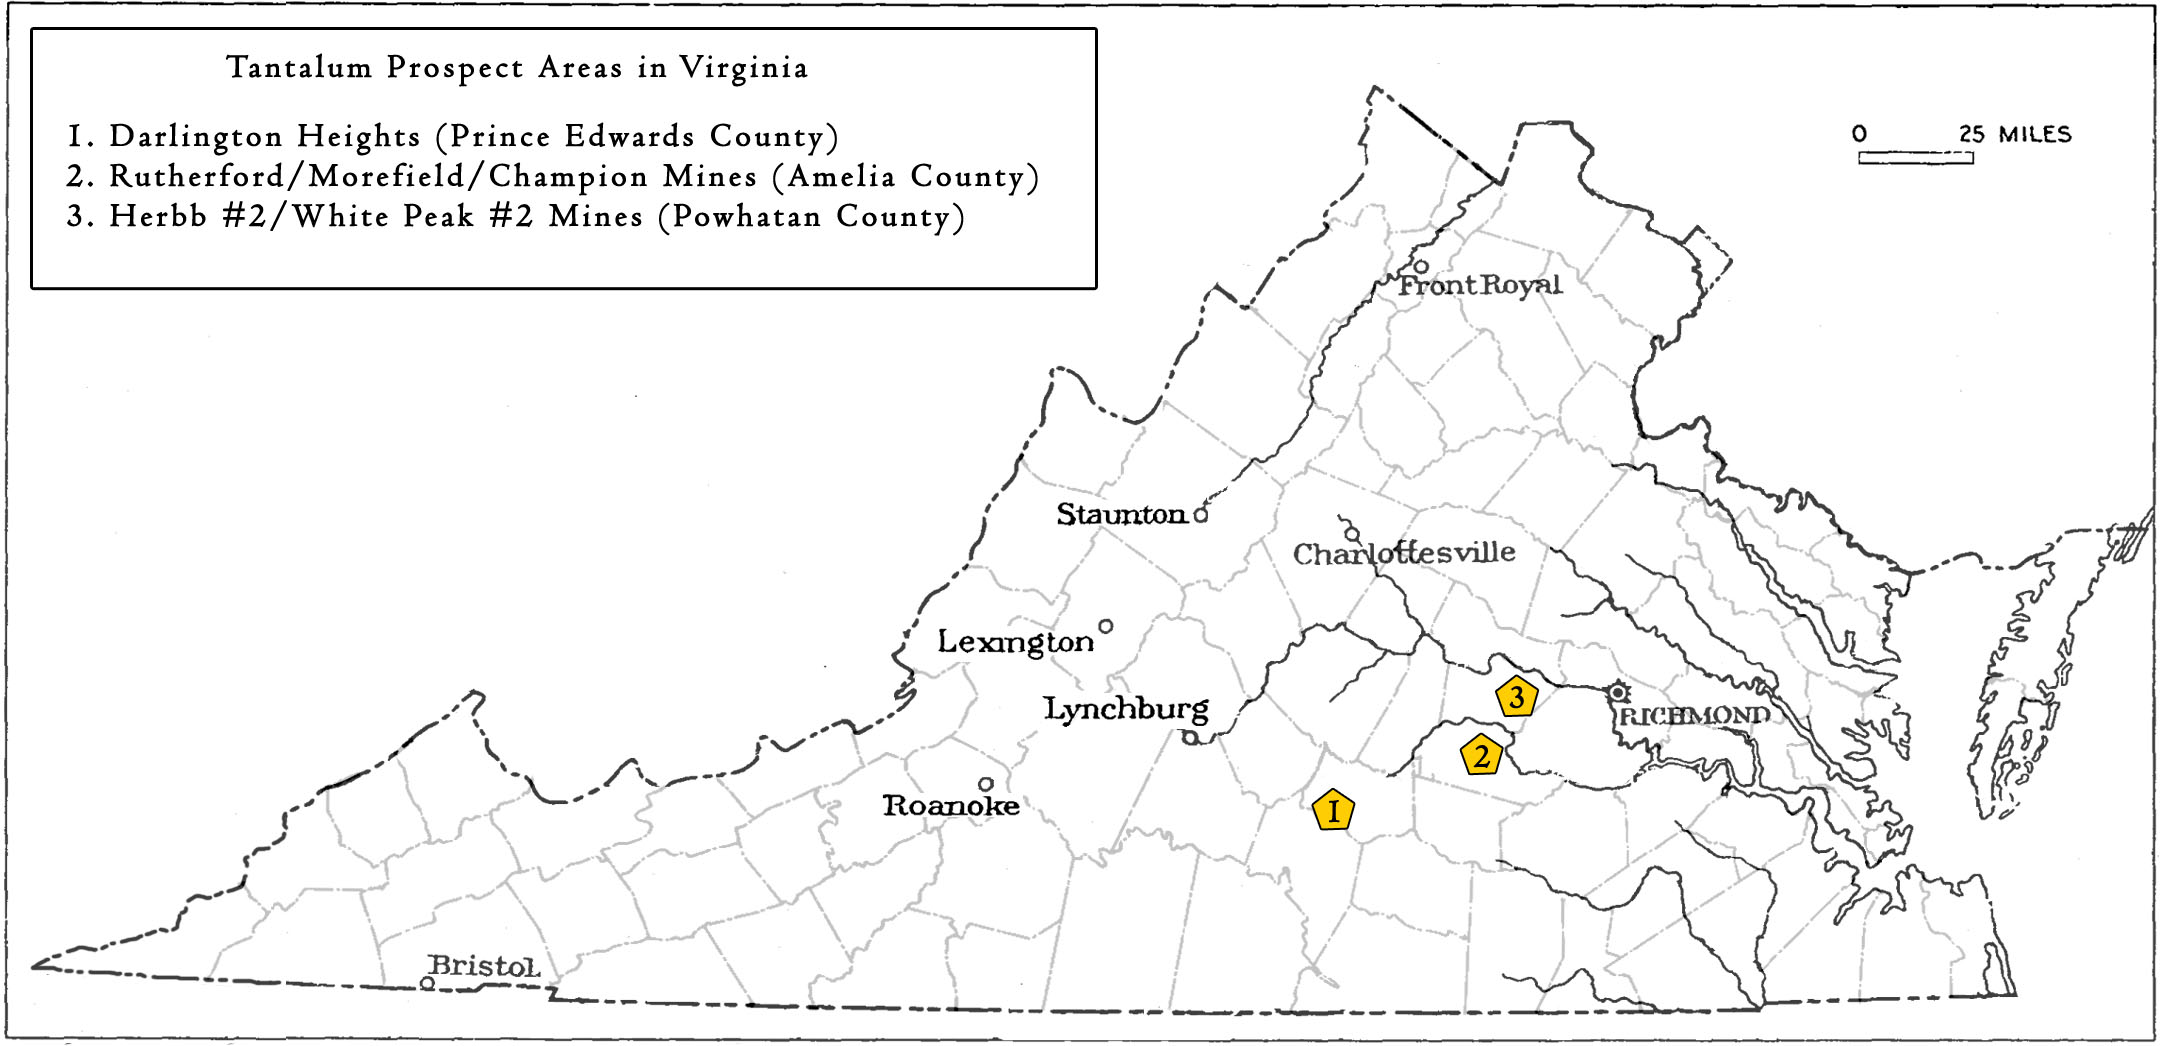 Locations in Virginia sampled or prospected for tantalum